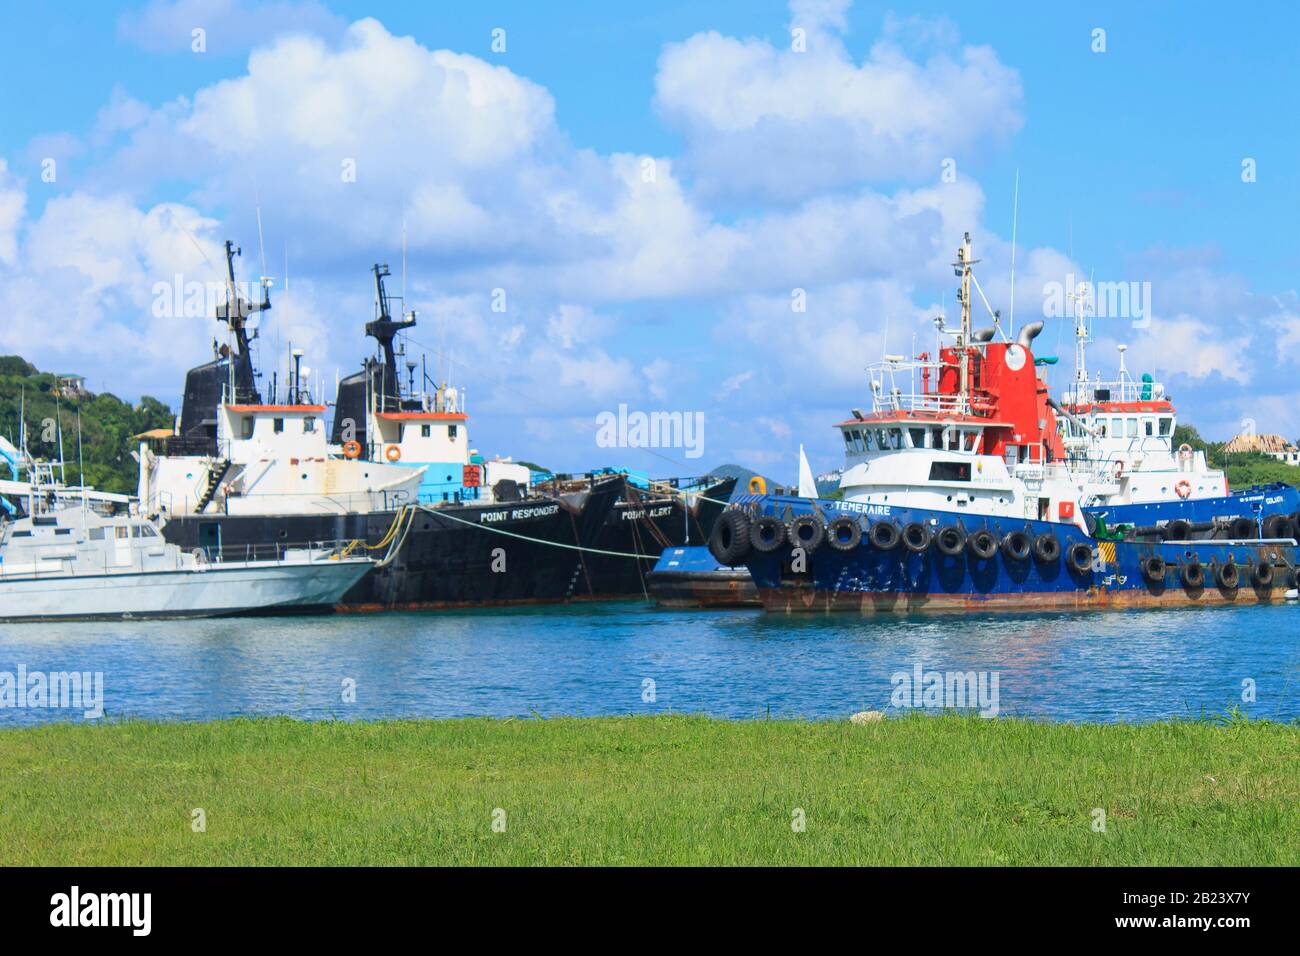 Castries, Saint Lucia - November 23, 2019. Two tugboats docked awaiting the arrival or departure of vessels to the harbor Stock Photo